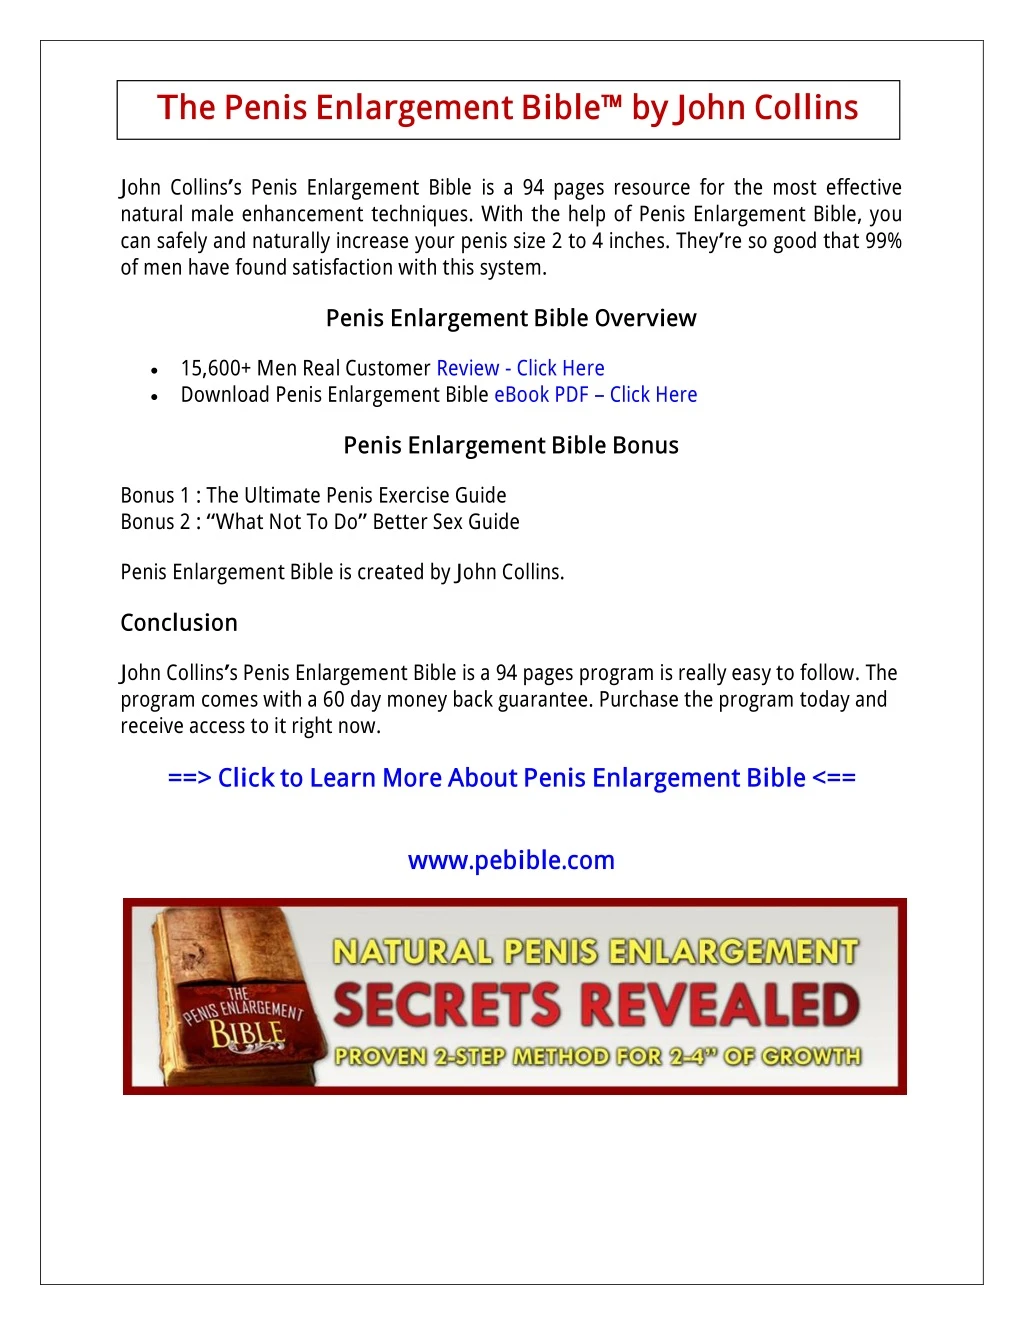 the penis enlargement bible by john collins